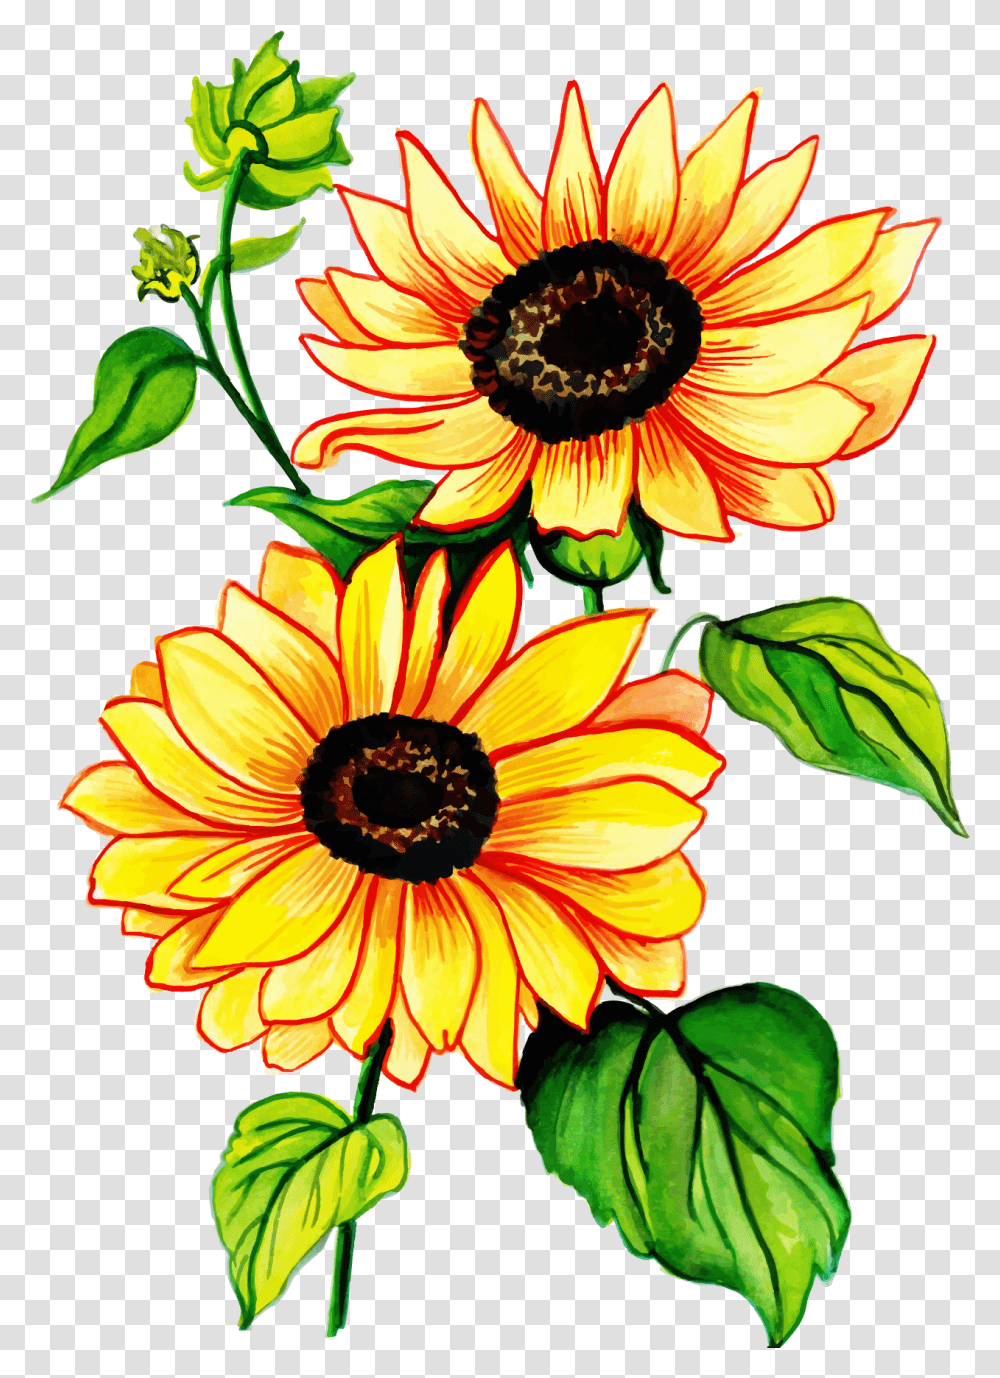 Sunflower Clipart Full Size Clipart 5350447 Pinclipart Fresh, Plant, Blossom, Treasure Flower, Daisy Transparent Png